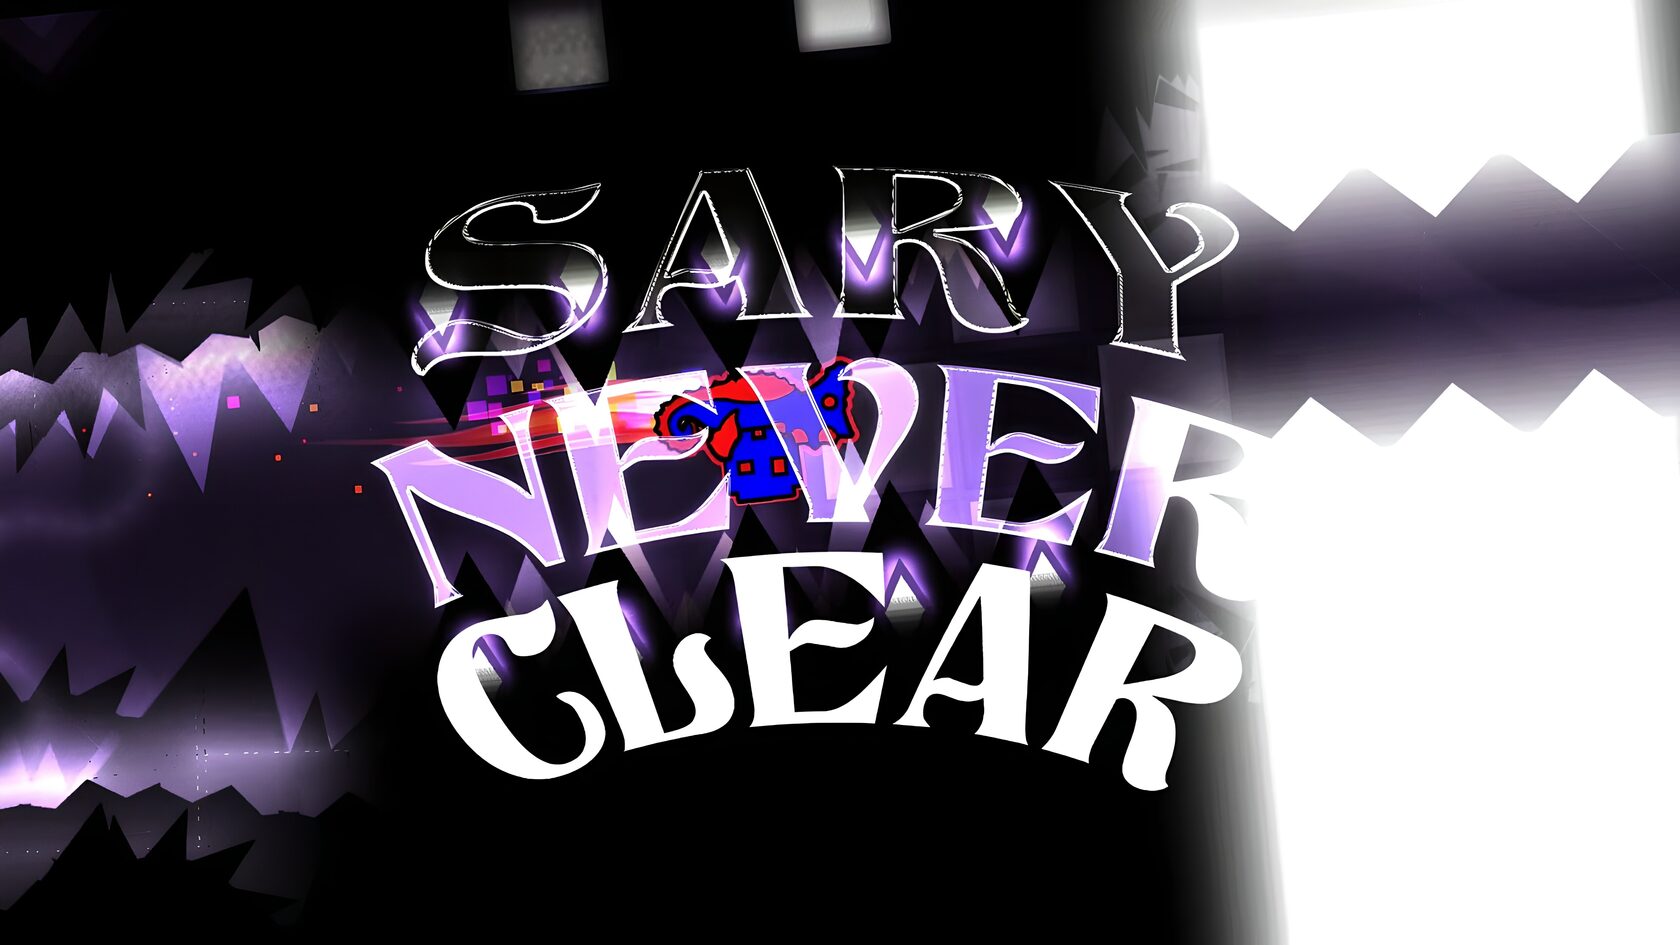 Never clearer. Sary never Clear GD. ПАМКА never Clear x. Saryxx never Clear. Showcase #4.